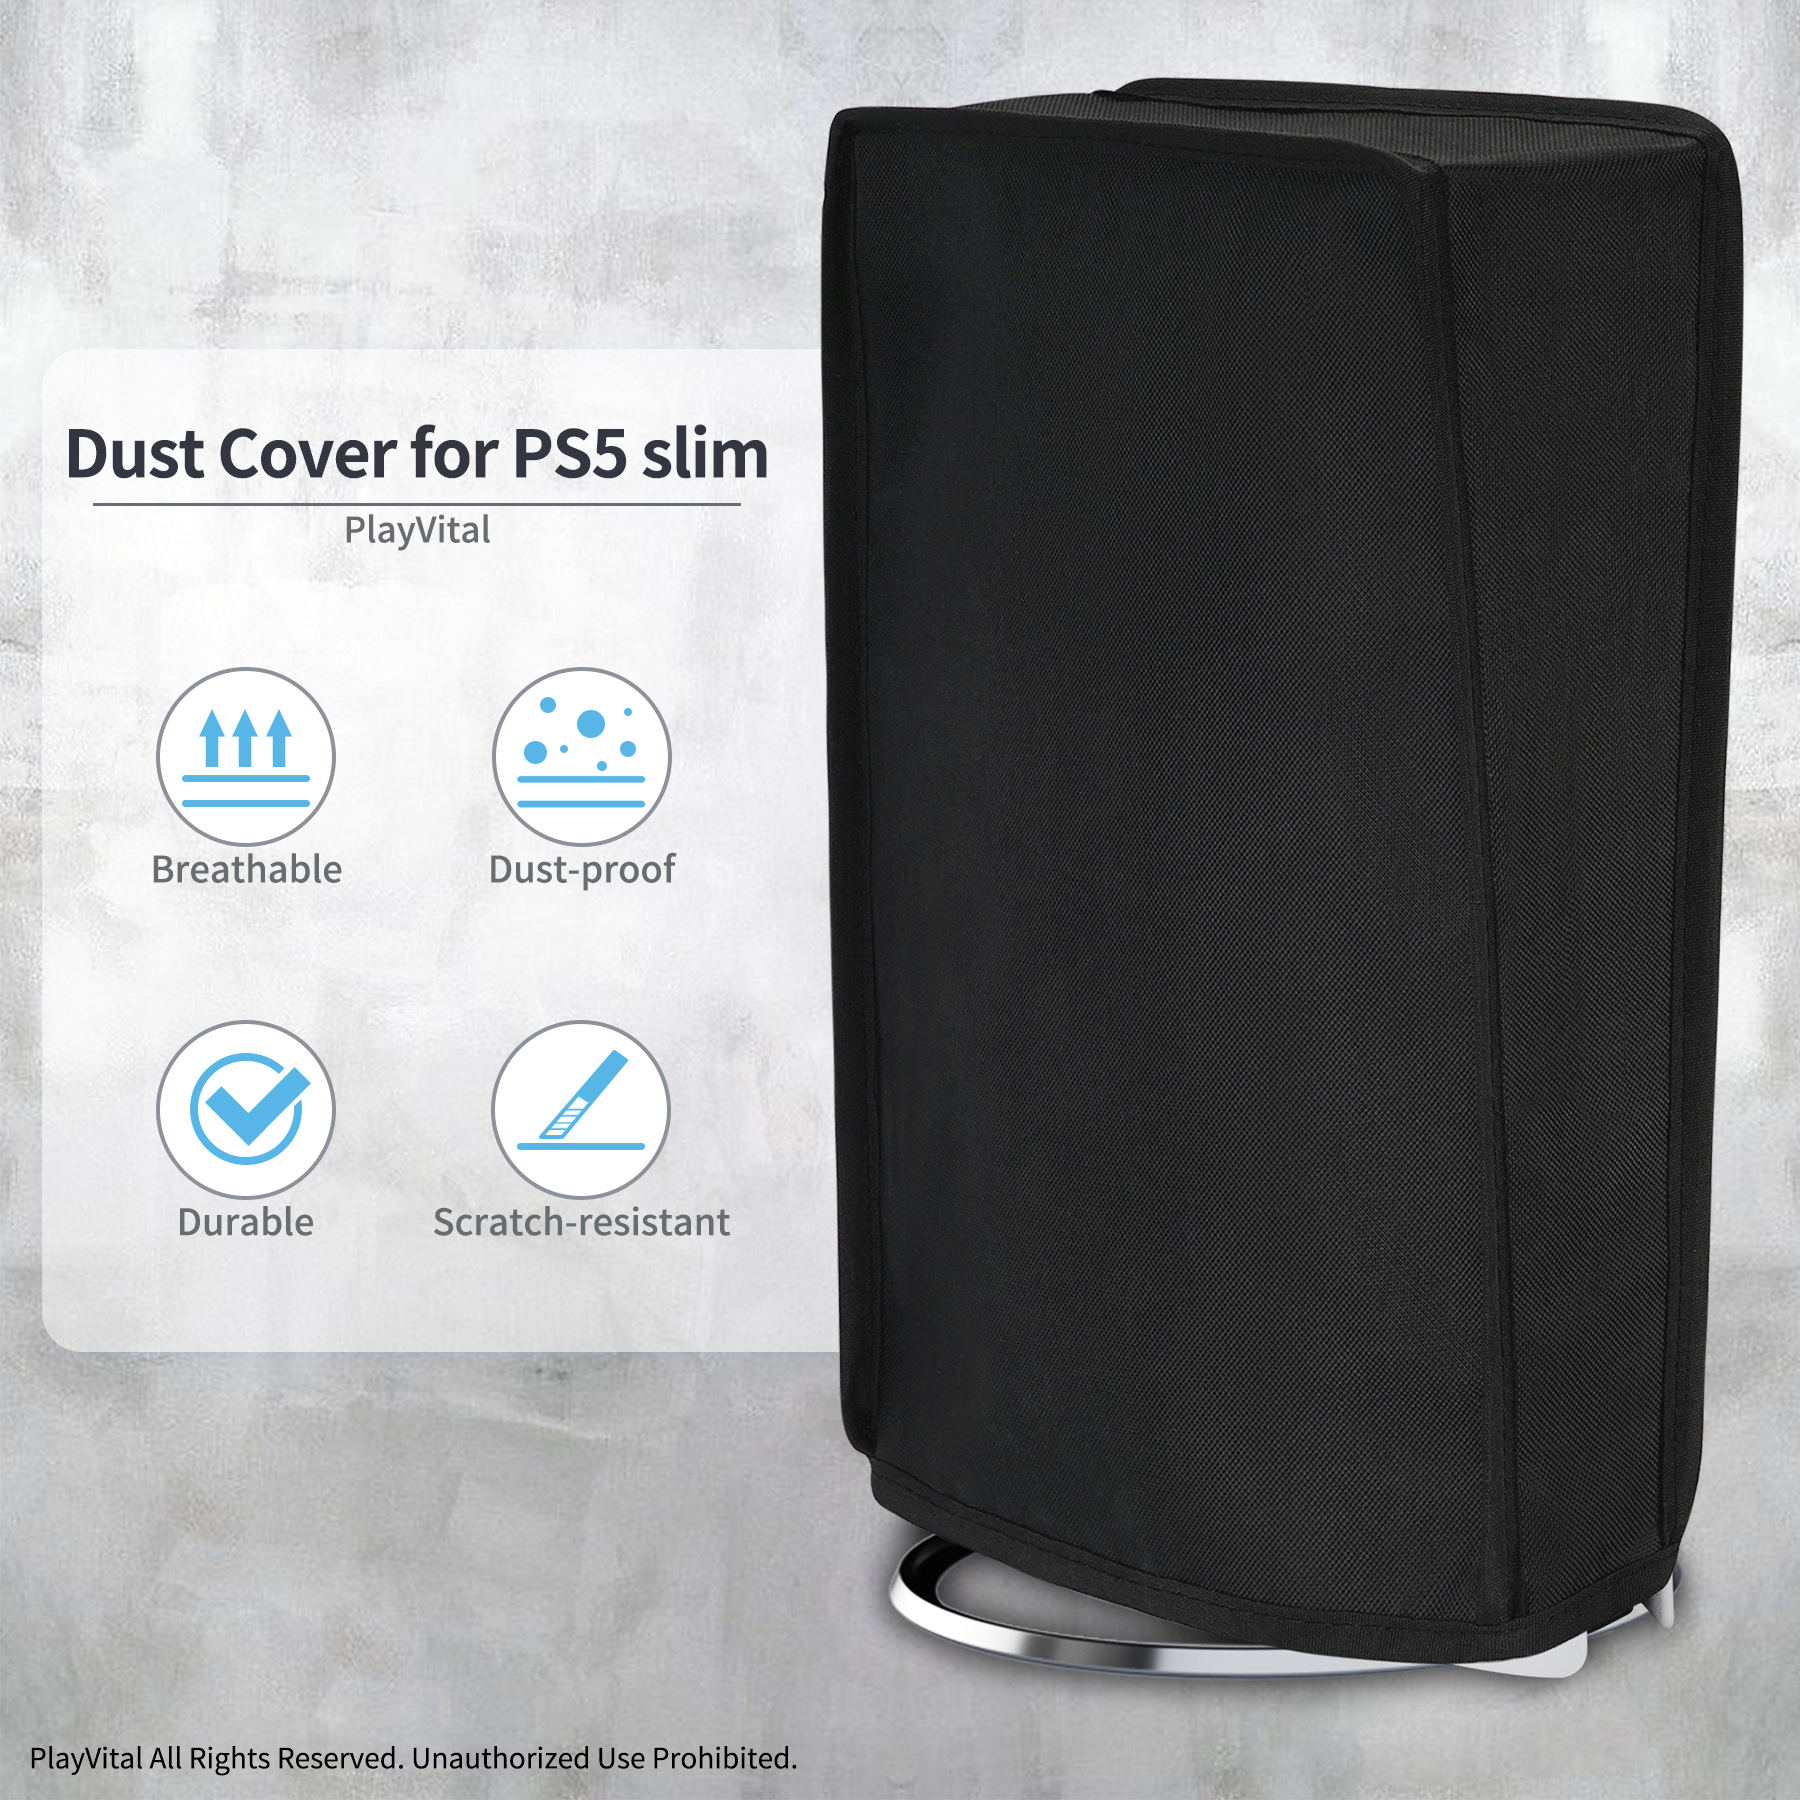 PlayVital Vertical Dust Cover for ps5 Slim Digital Edition(The New Smaller Design), Nylon Dust Proof Protector Waterproof Cover Sleeve for ps5 Slim Console - Black - JKSPFM001 PlayVital